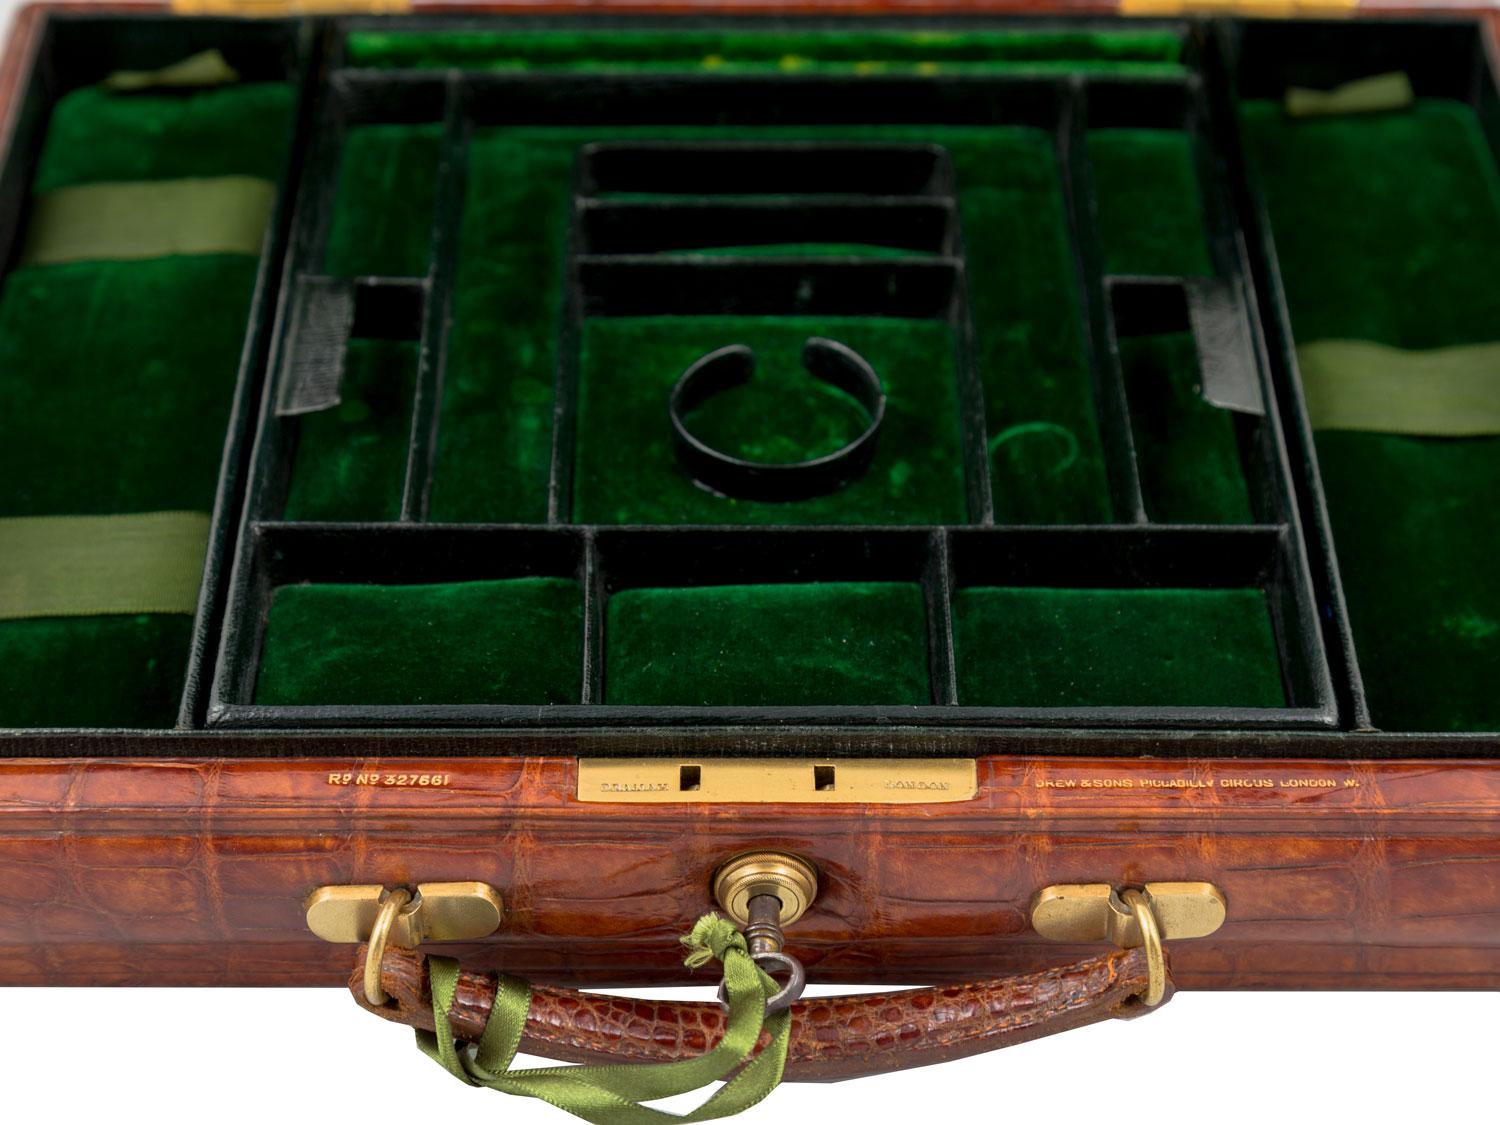 A lovely crocodile jewelry case by Drew & Sons, English circa 1900. Drew & Sons was founded by John Drew and one of his sons, Samuel Drew. The firm began in 1844 and was sold in the 1930s. This jewelry Box is perfect for displaying at home or on the